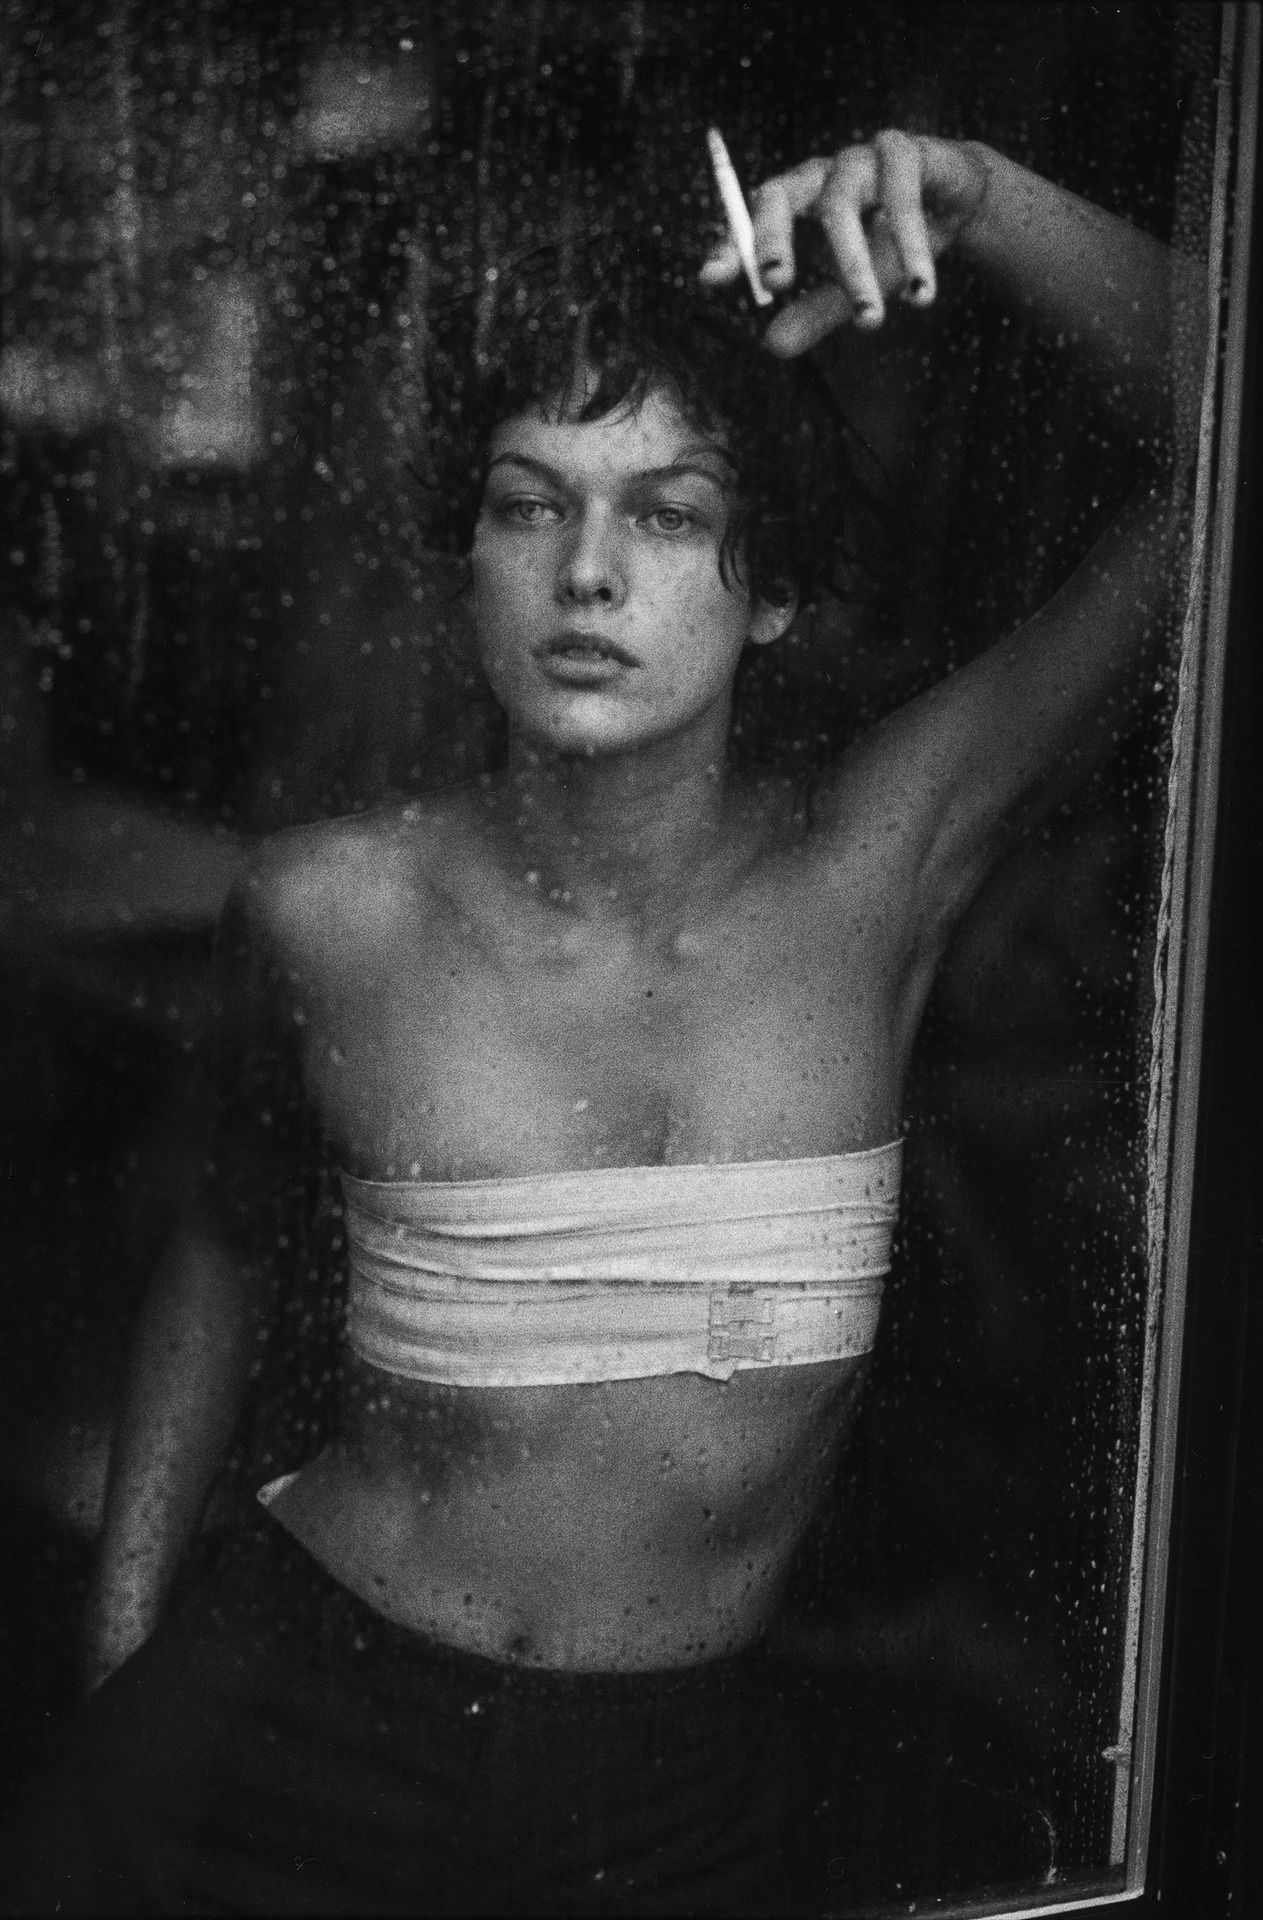 Milla Jovovich photographed by Peter Lindbergh for Vogue Italia, New York 1996